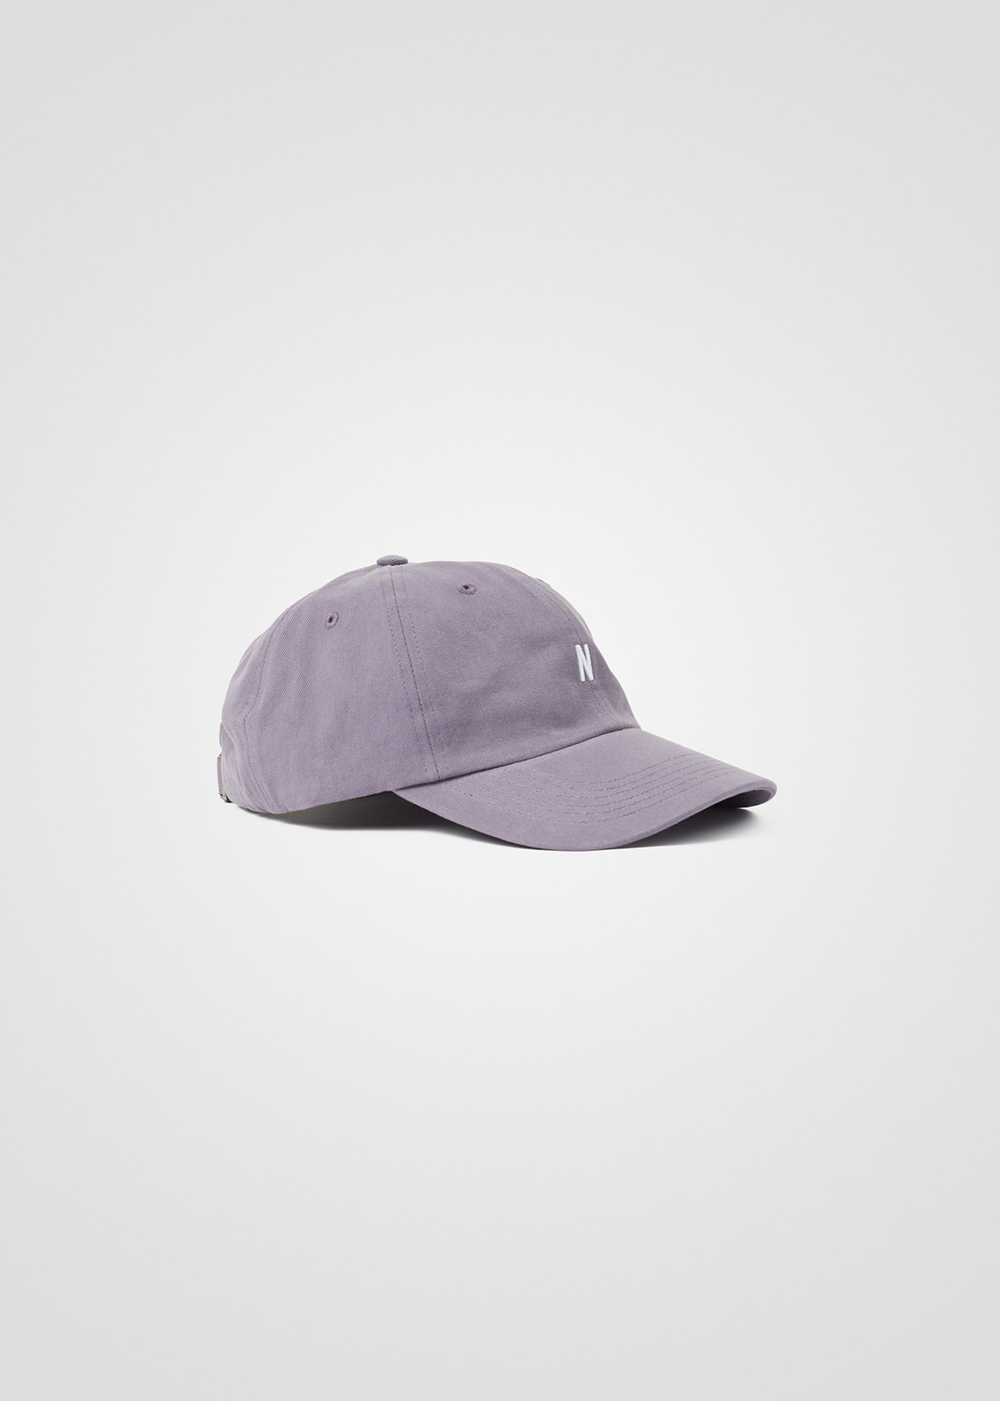 Zoomed out view Norse Projects Twill Cap in Dusk Purple with an embroidered "N"